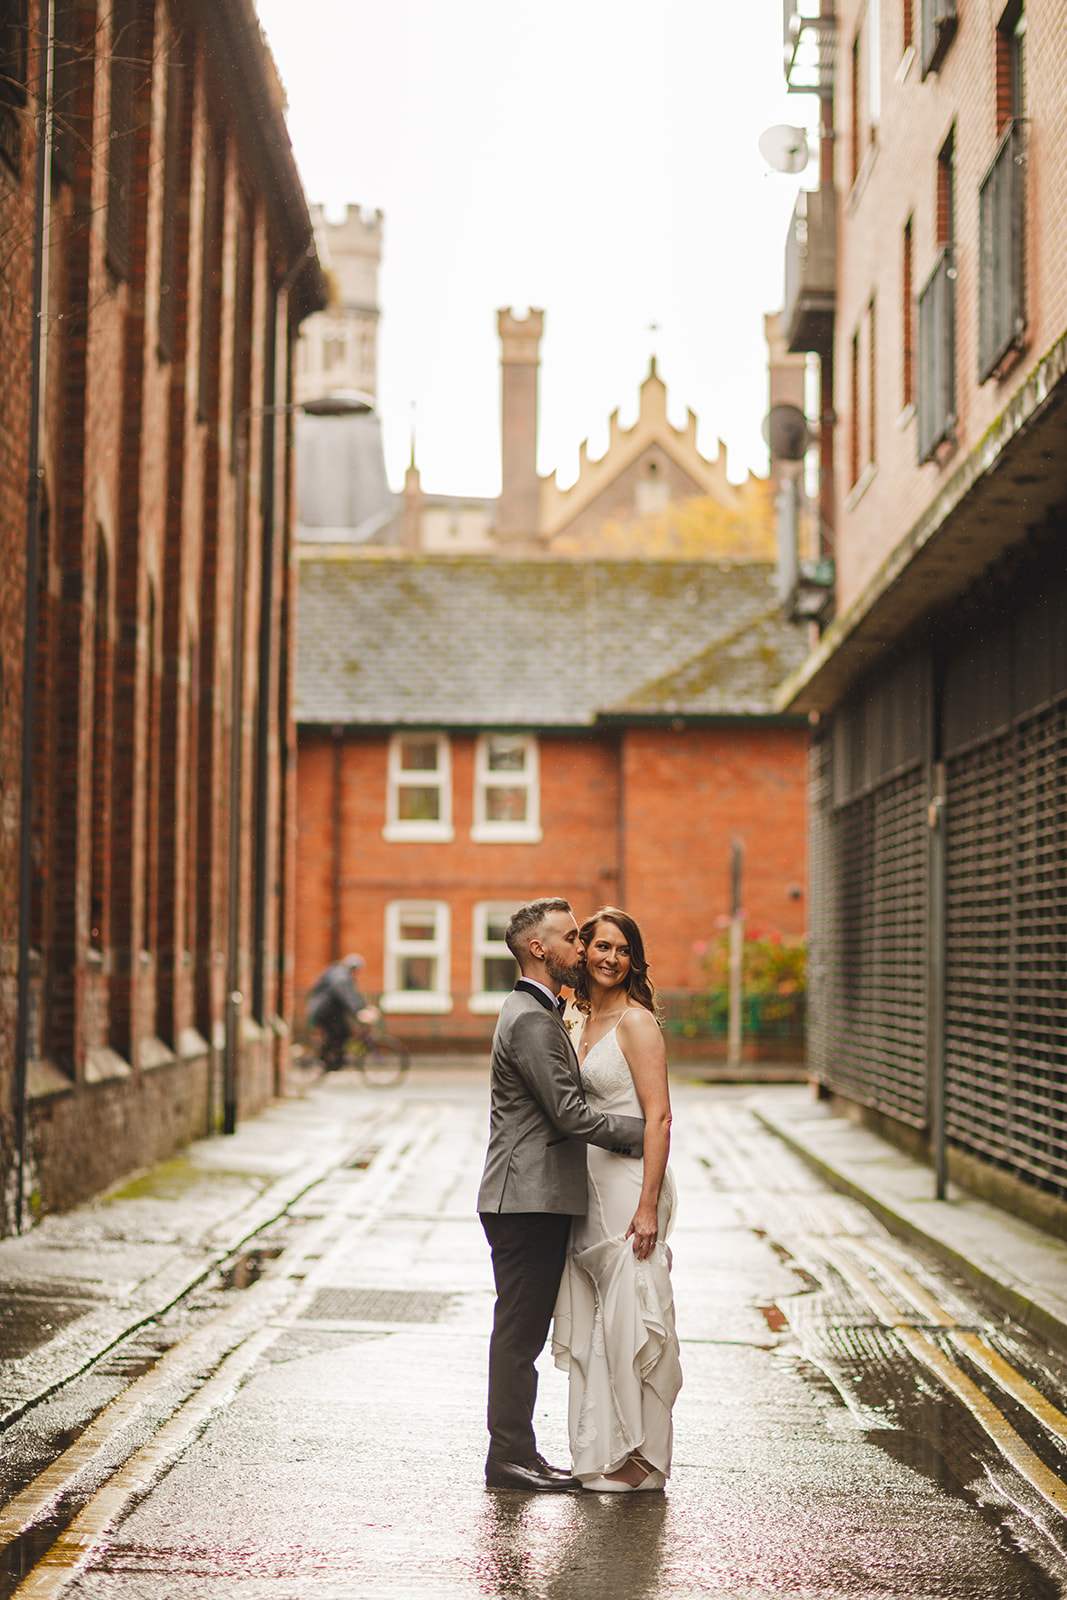 Wedding photography in the rainy cobbled streets of Belfast City